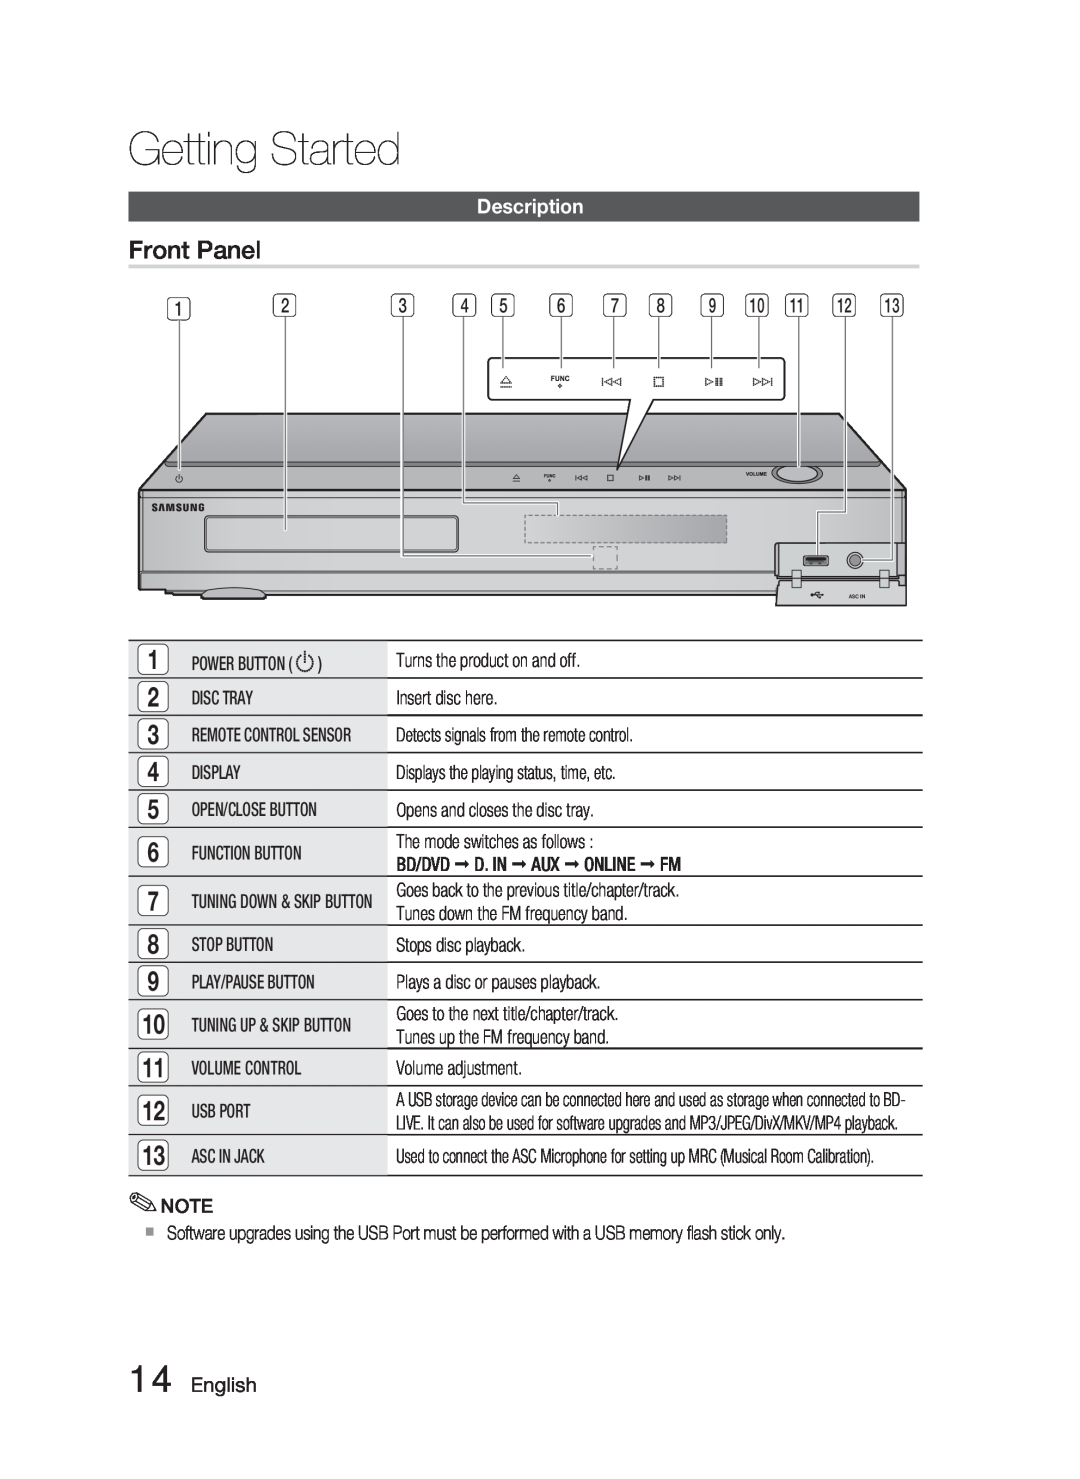 Samsung HT-C5500 user manual Front Panel, Description, English, Getting Started 